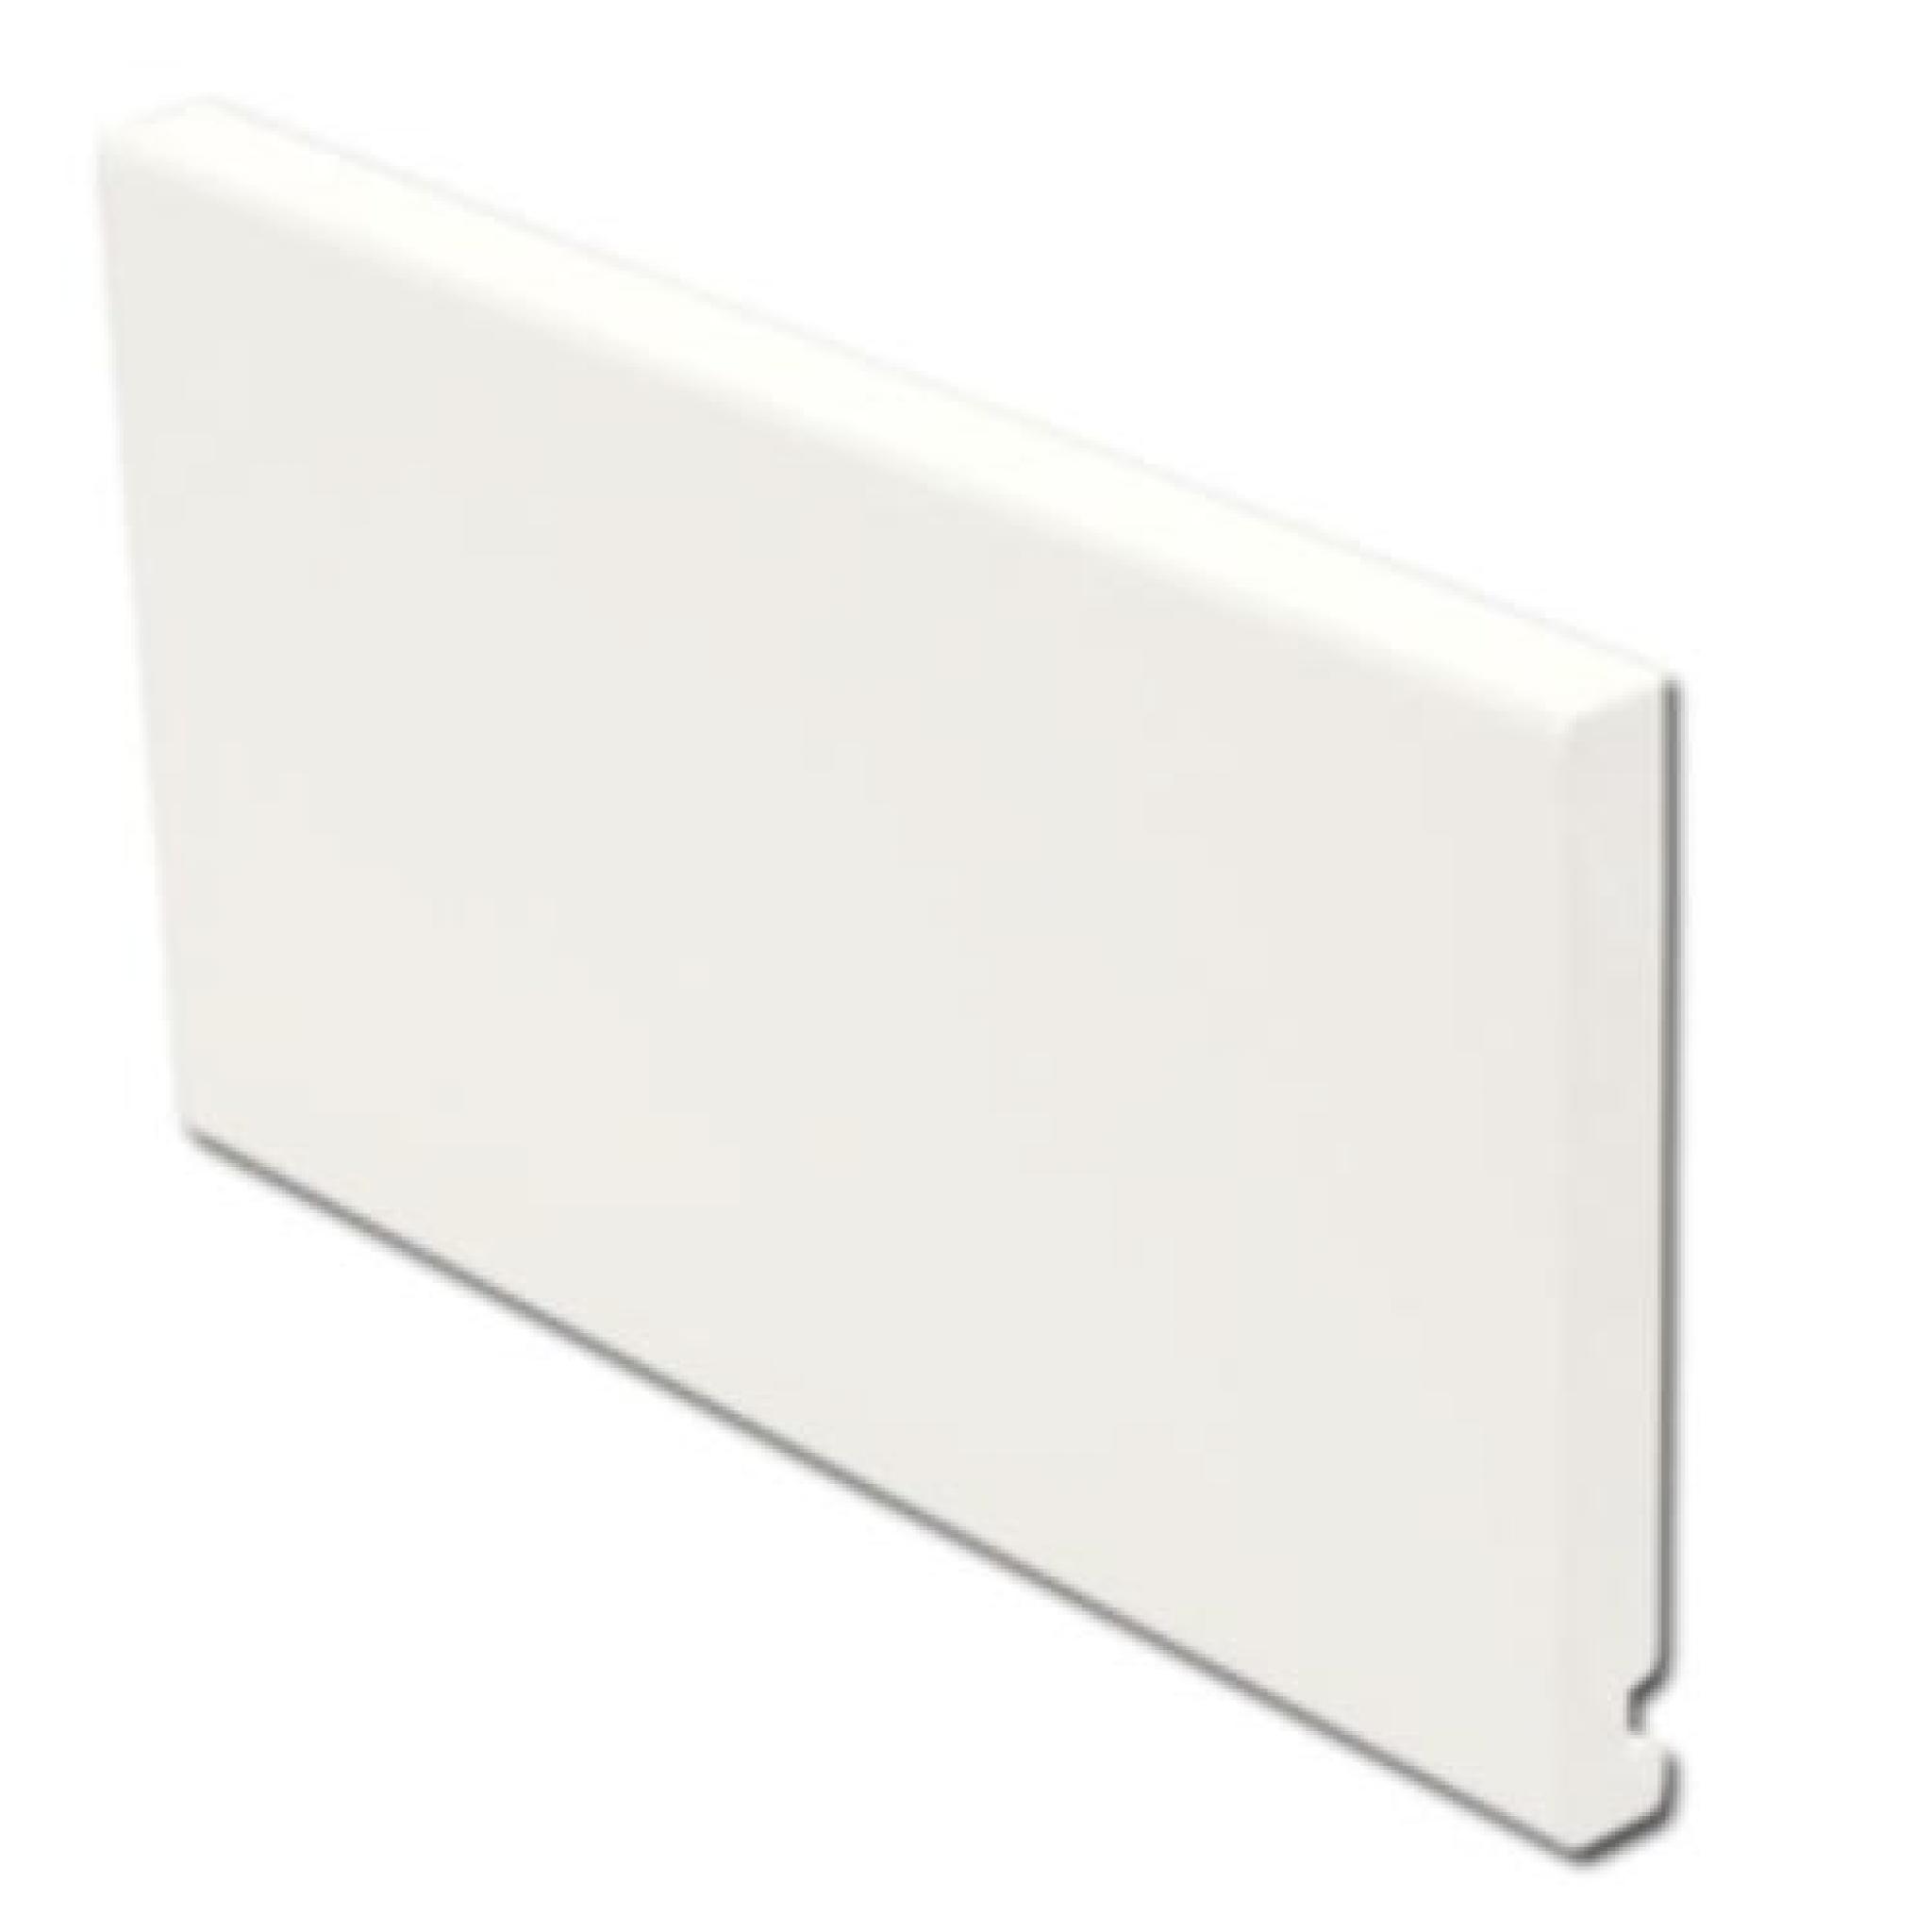 White Replacement Flat Fascia Boards 16mm x 5mtr